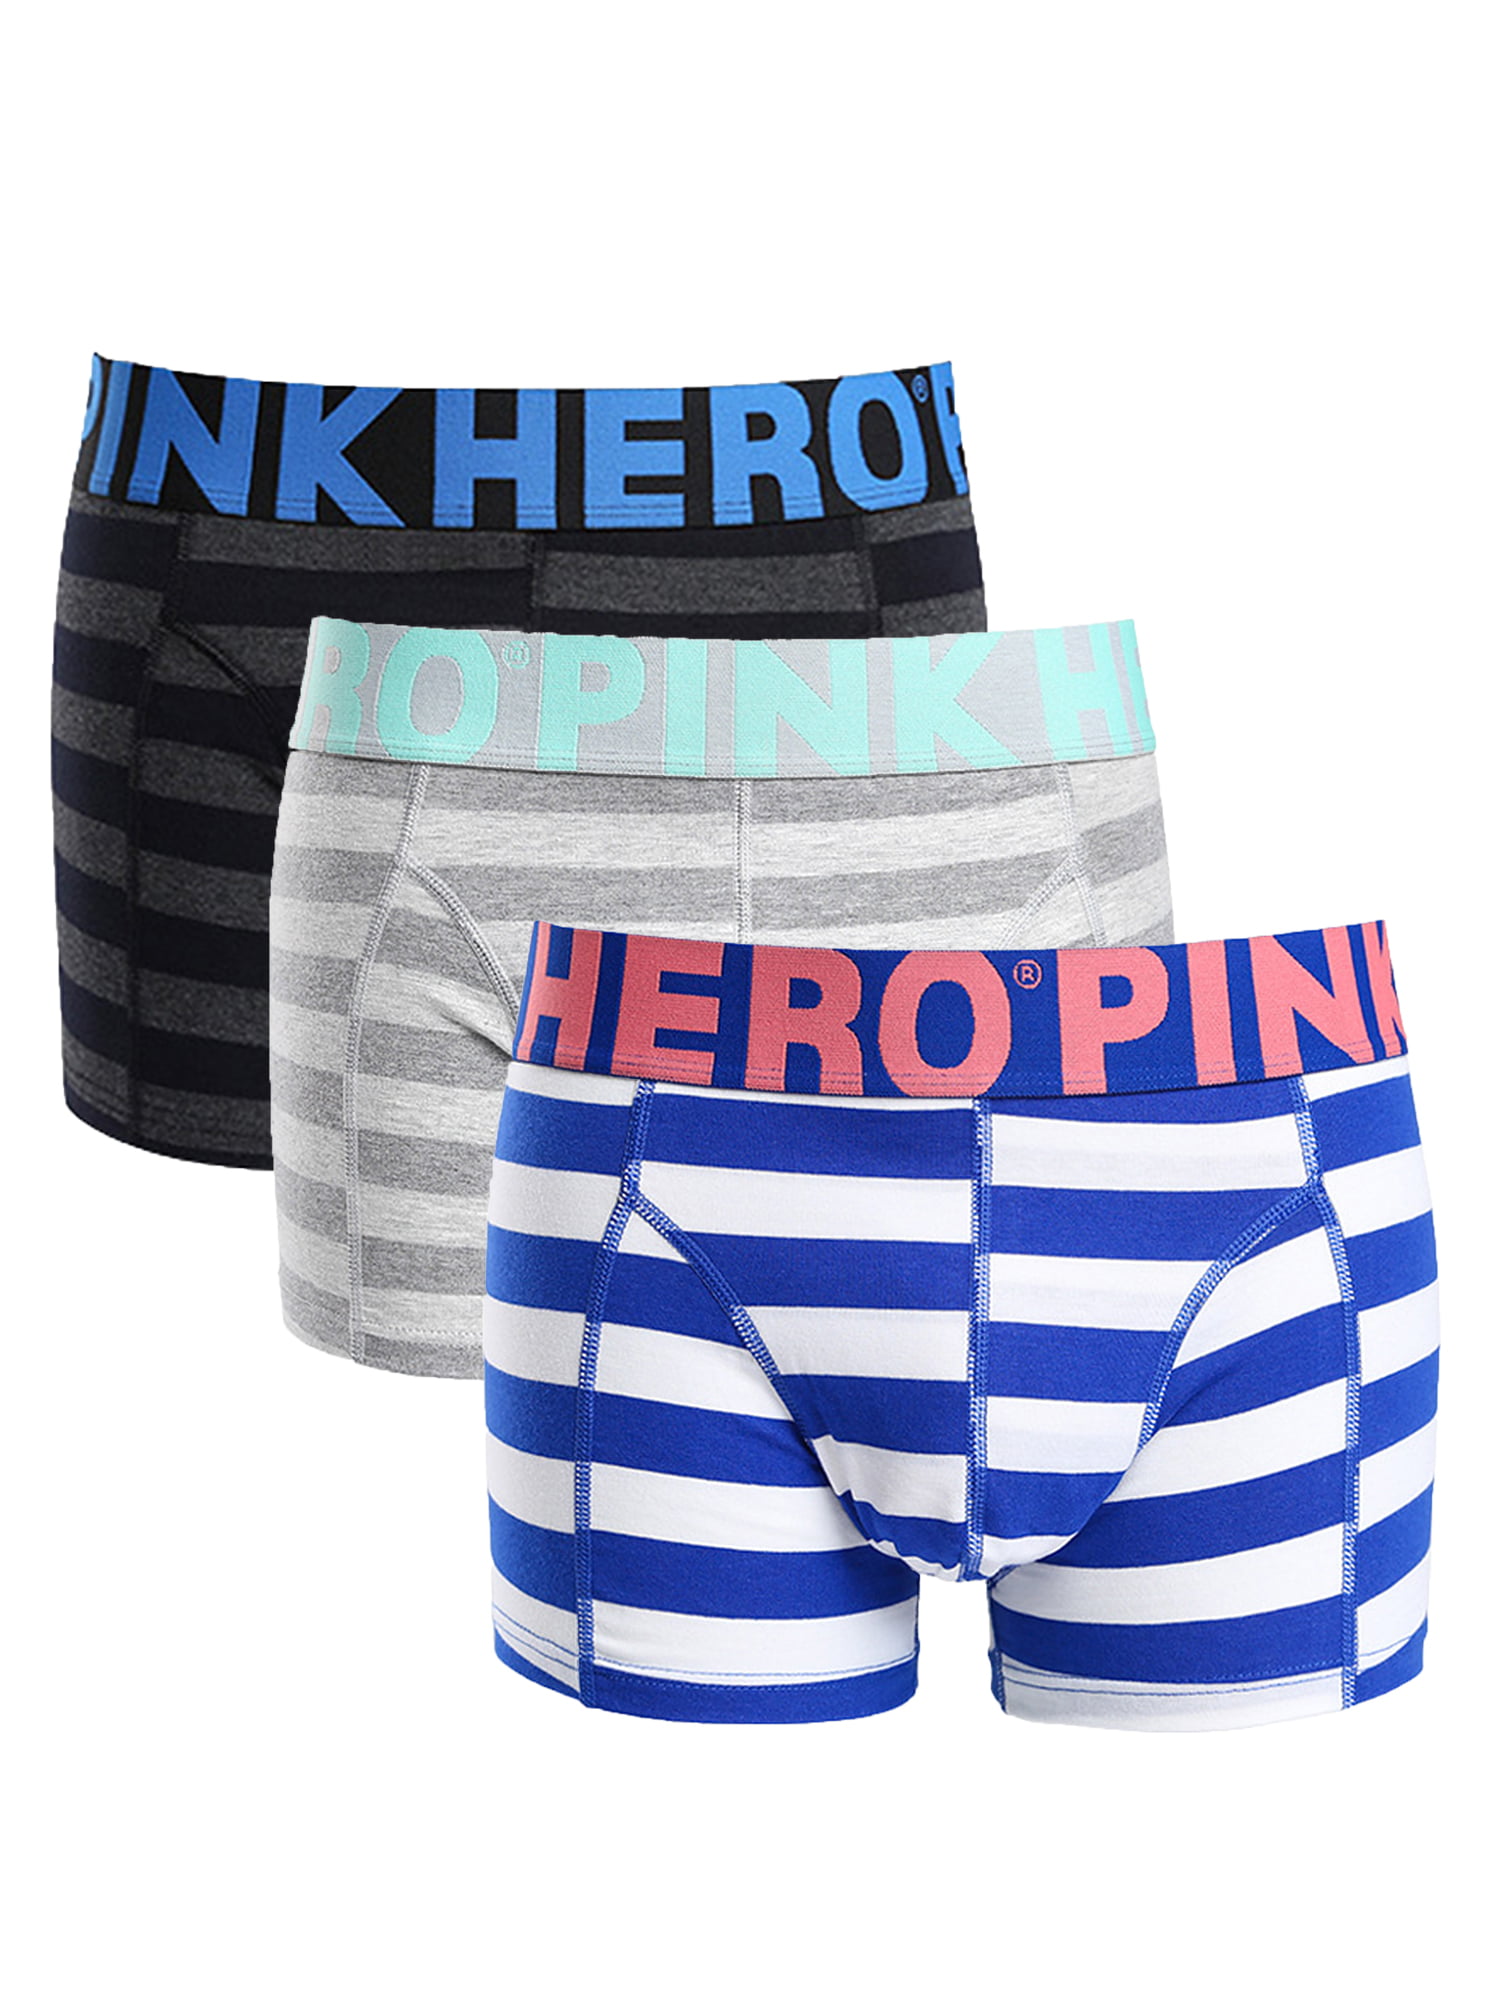 Boxer Mens Boxer Shorts %95 Cotton %5 Elastane High Quality Underwear Pack of 3 